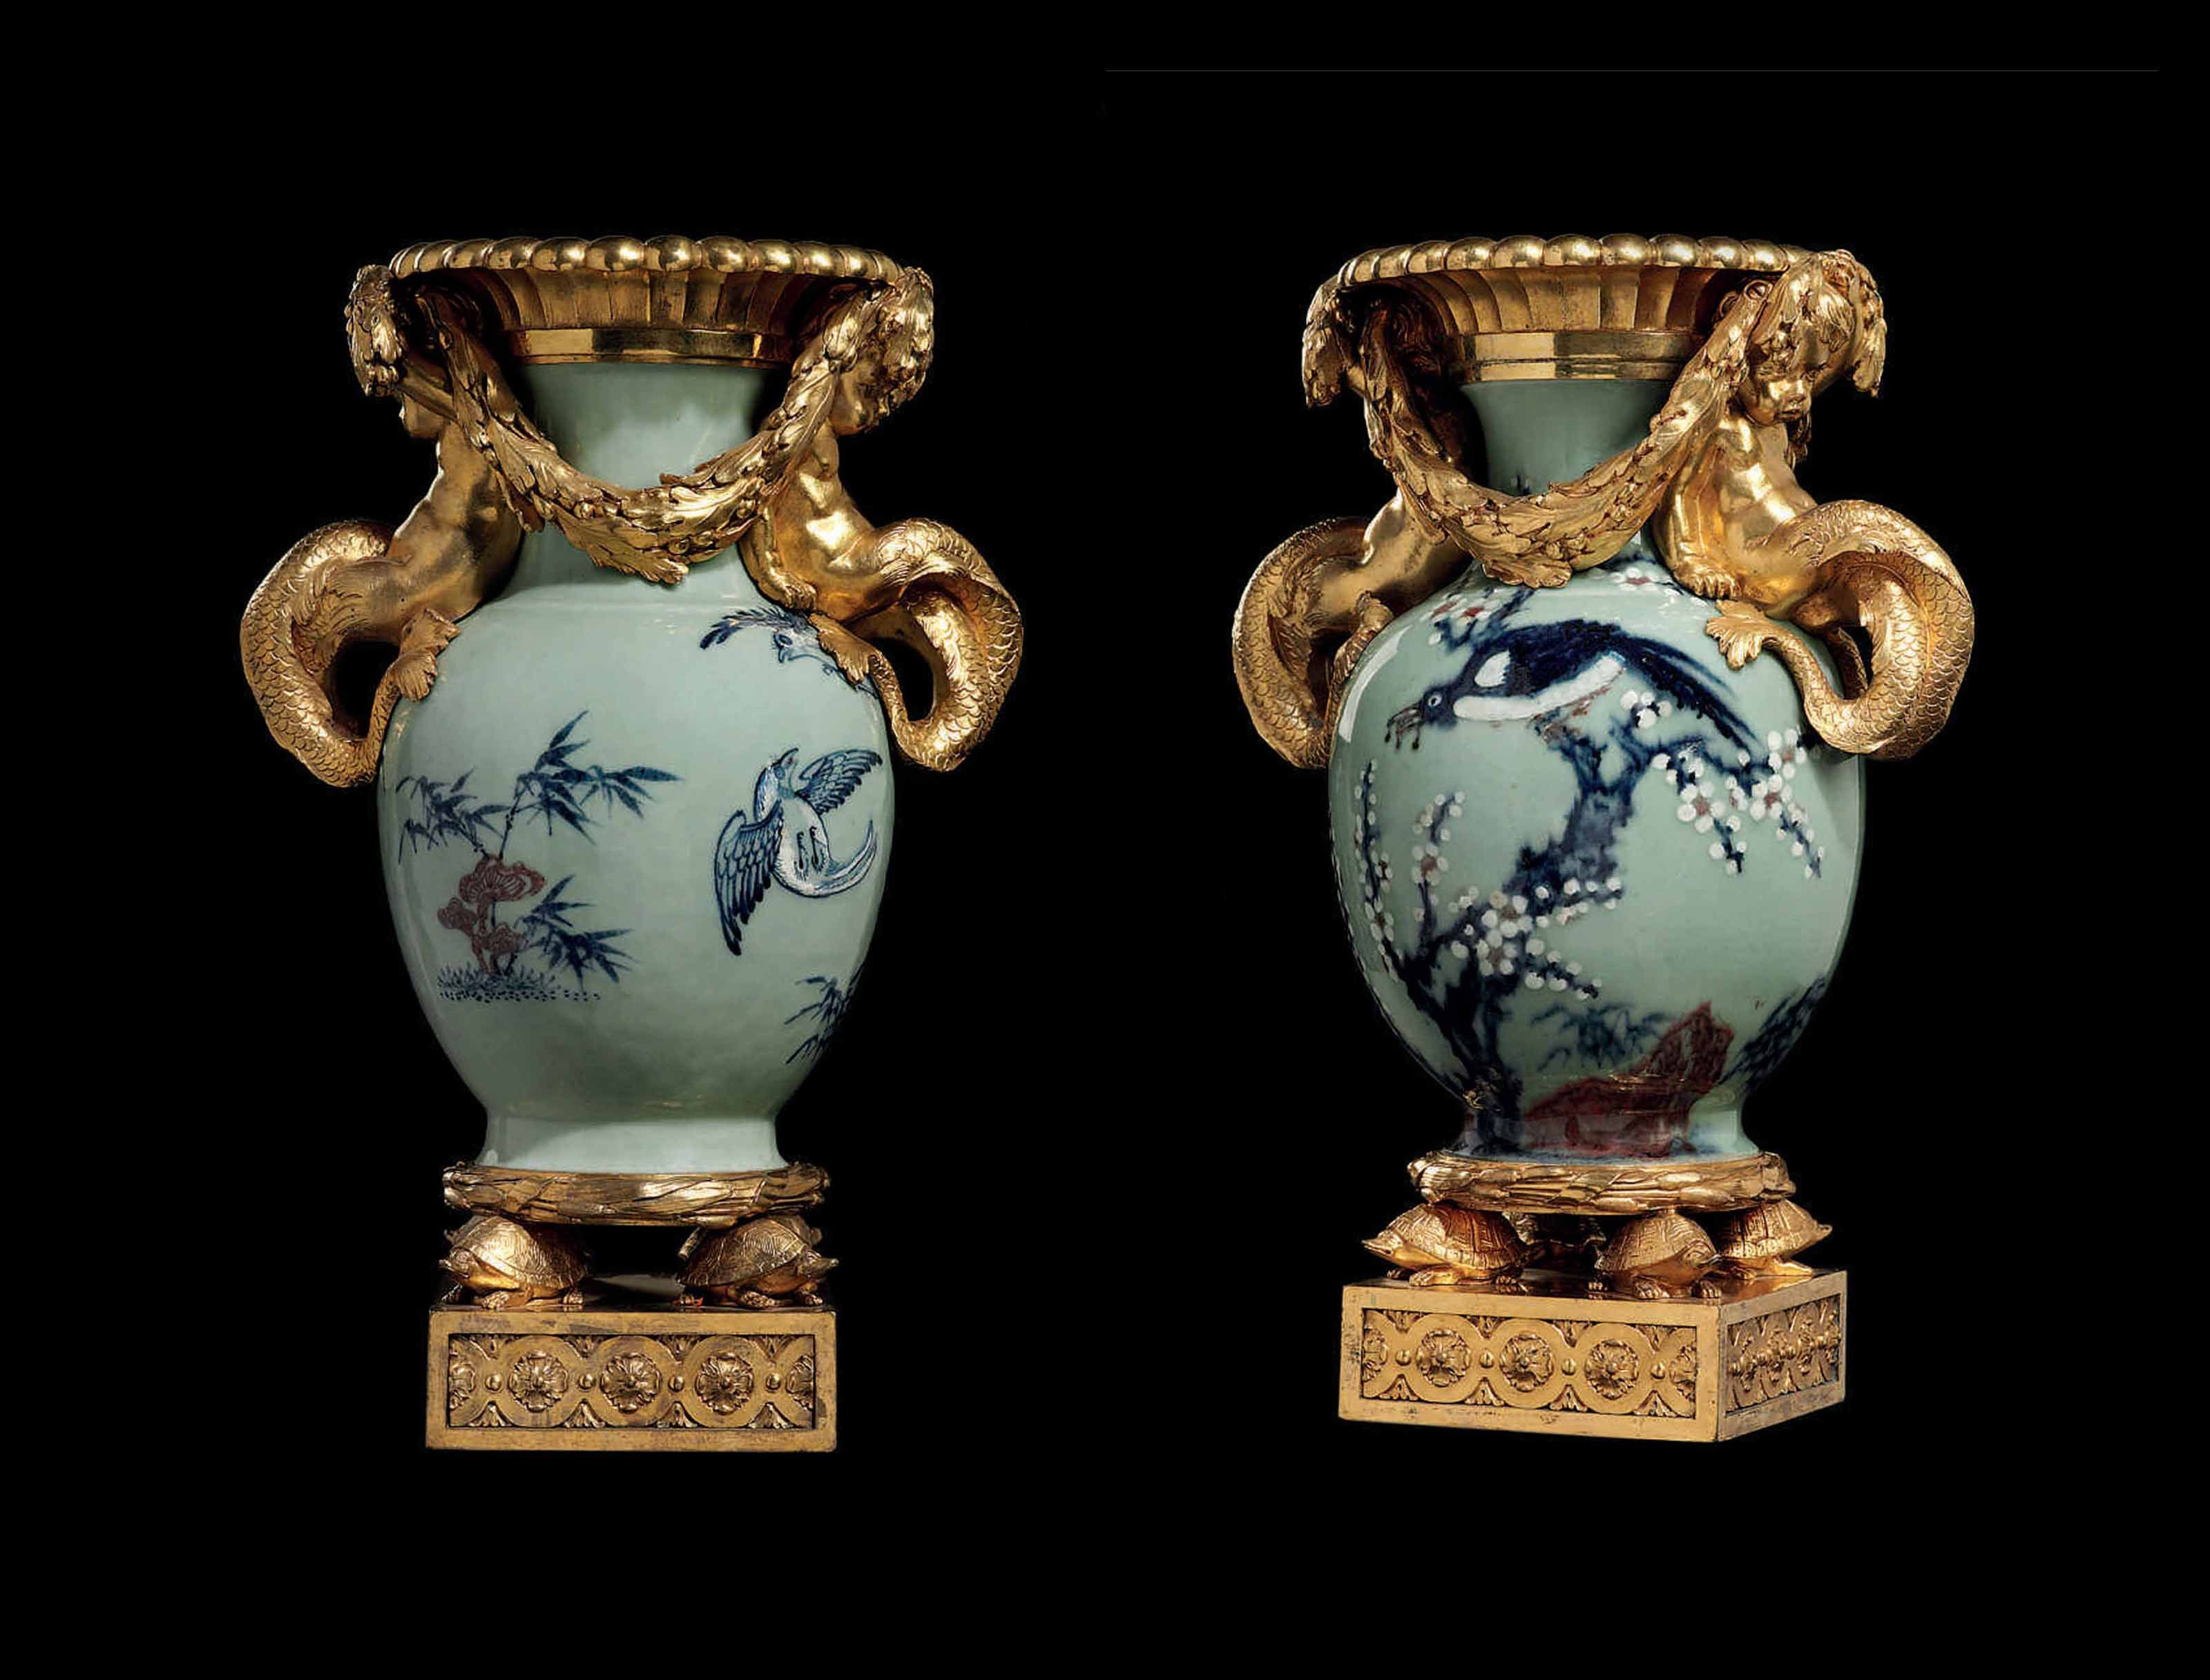 14 Popular Qianlong Vase Price 2023 free download qianlong vase price of c1770 lot 14 a near pair of late louis xv ormolu mounted chinese with regard to a near pair of late louis xv ormolu mounted chinese celadon porcelain vases aux tritons